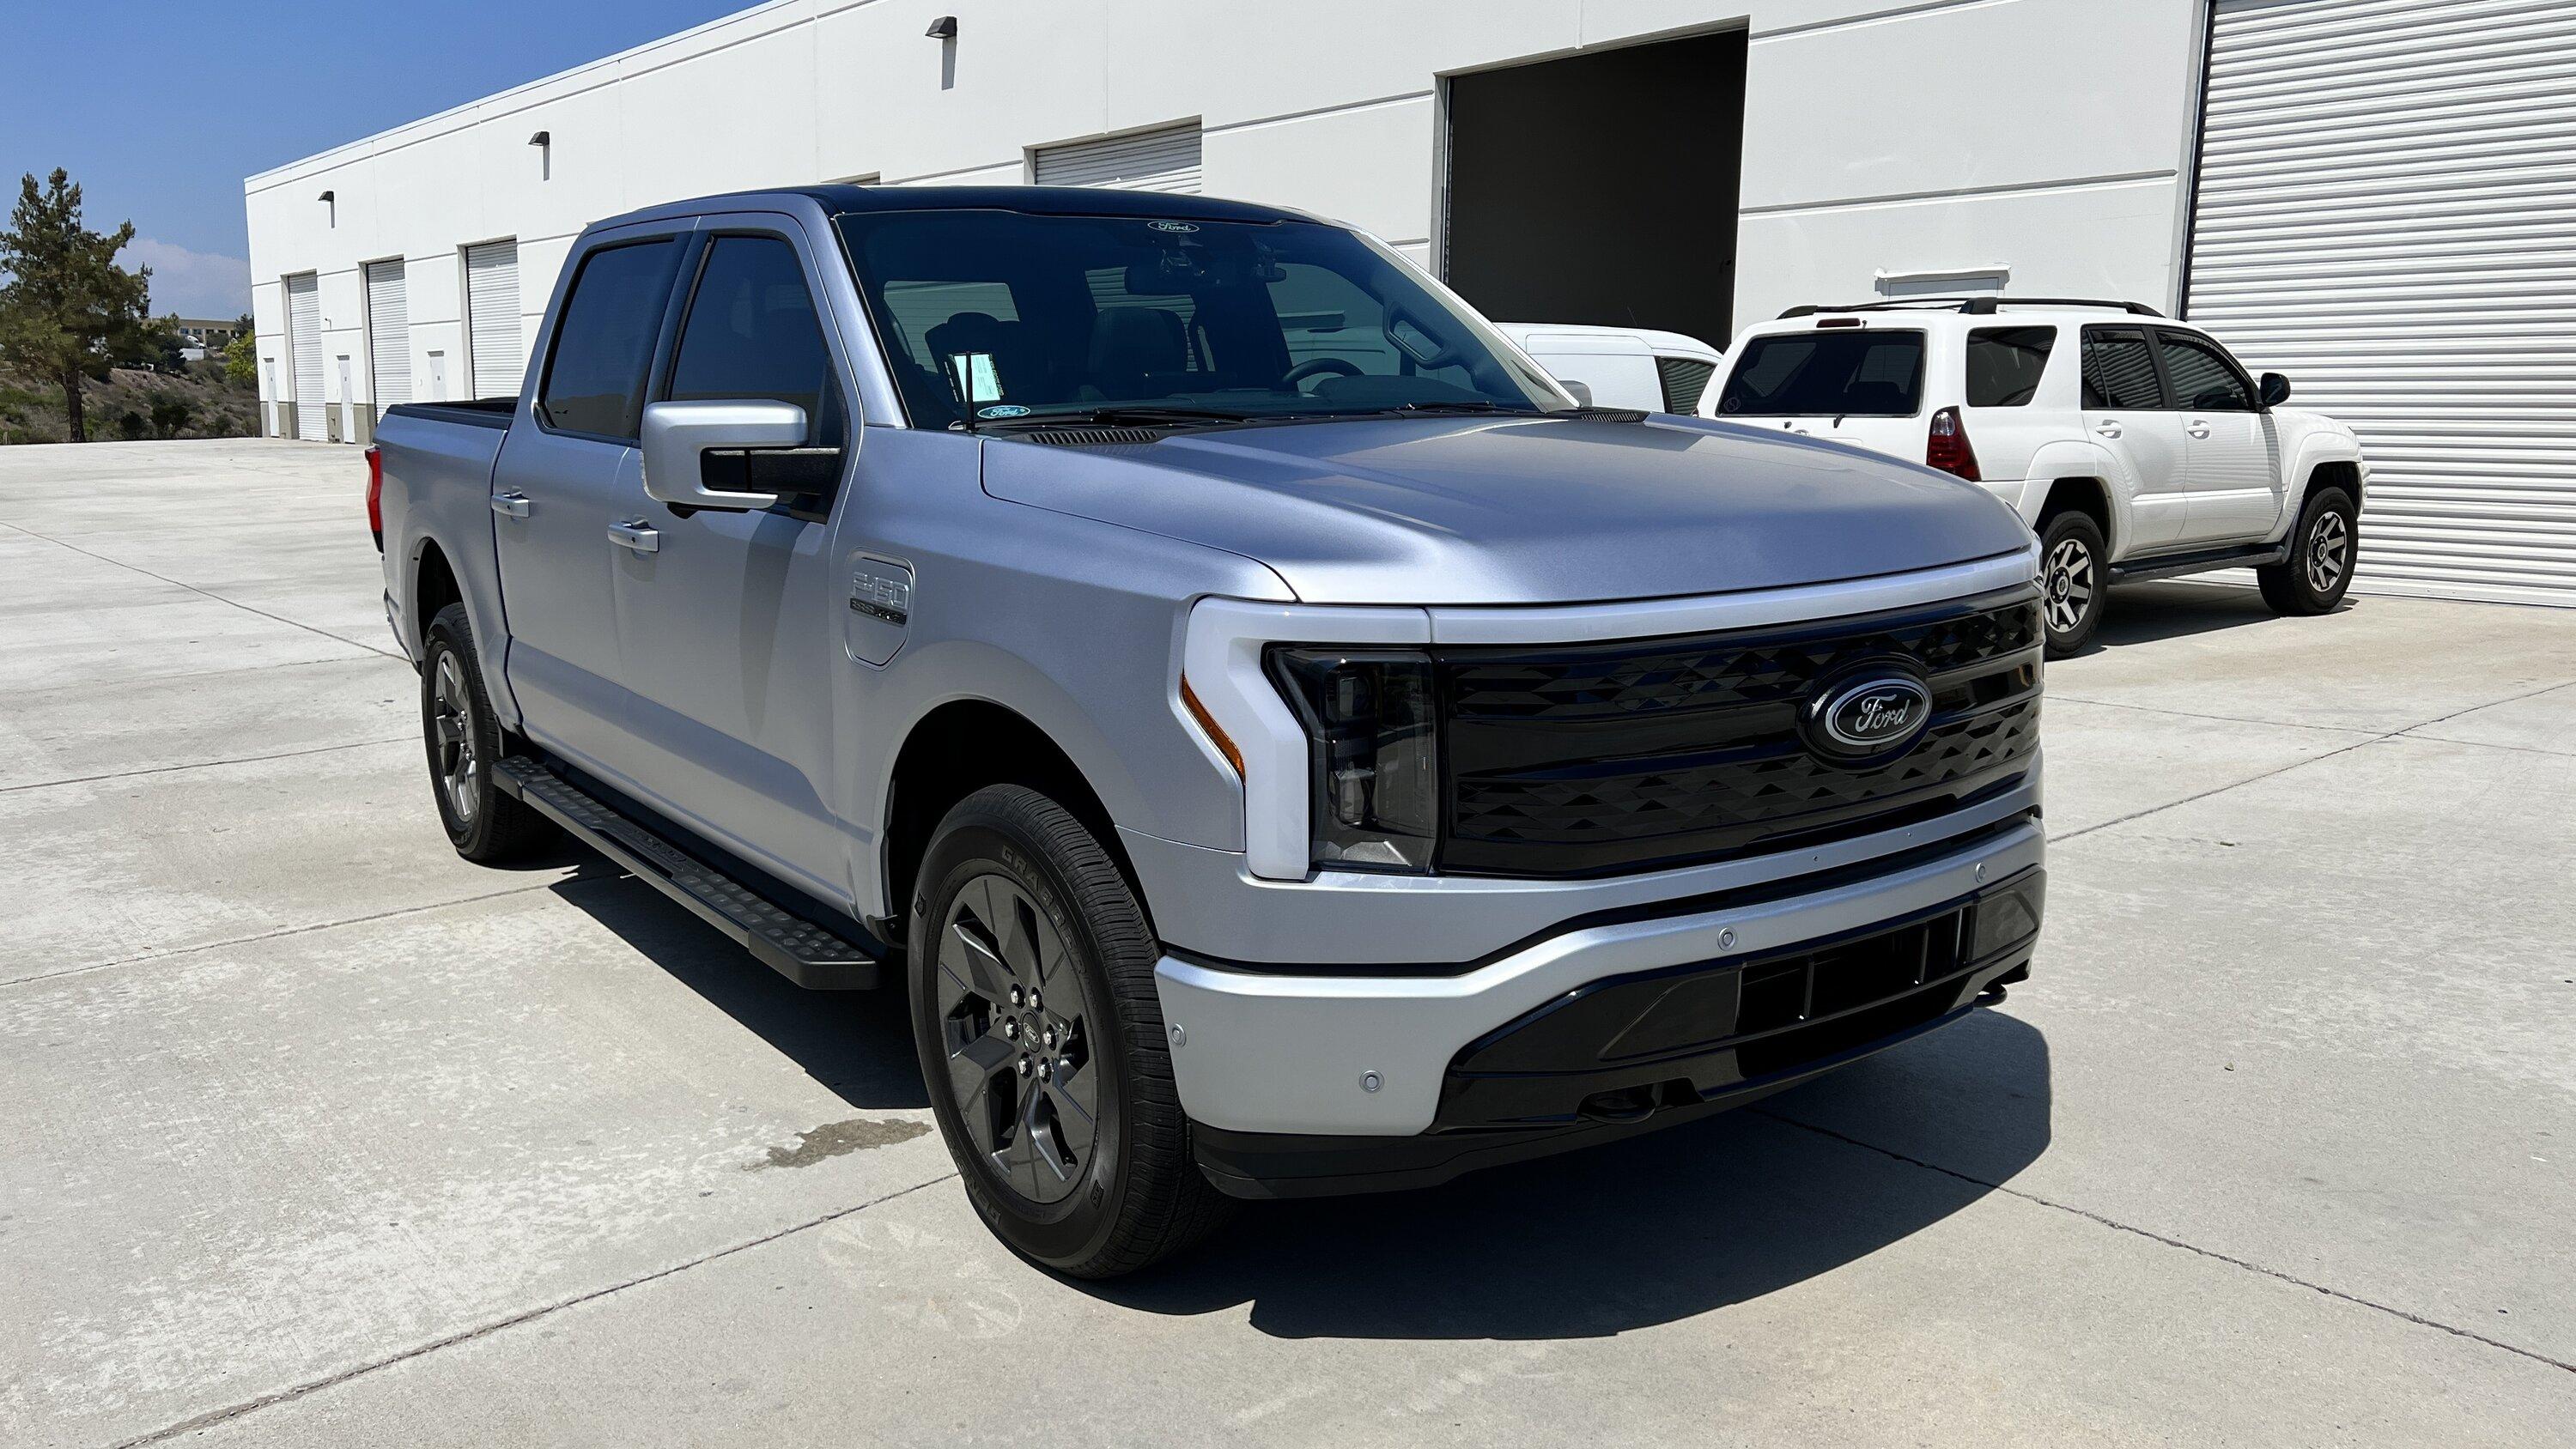 Ford F-150 Lightning Iced Blue Silver Lightning Build. Mods: PPF matte finish, Line-X, gloss black painted grille, black wrapped roof, wheels D3092FAA-C361-438F-BD28-99C9CBF5C2AD